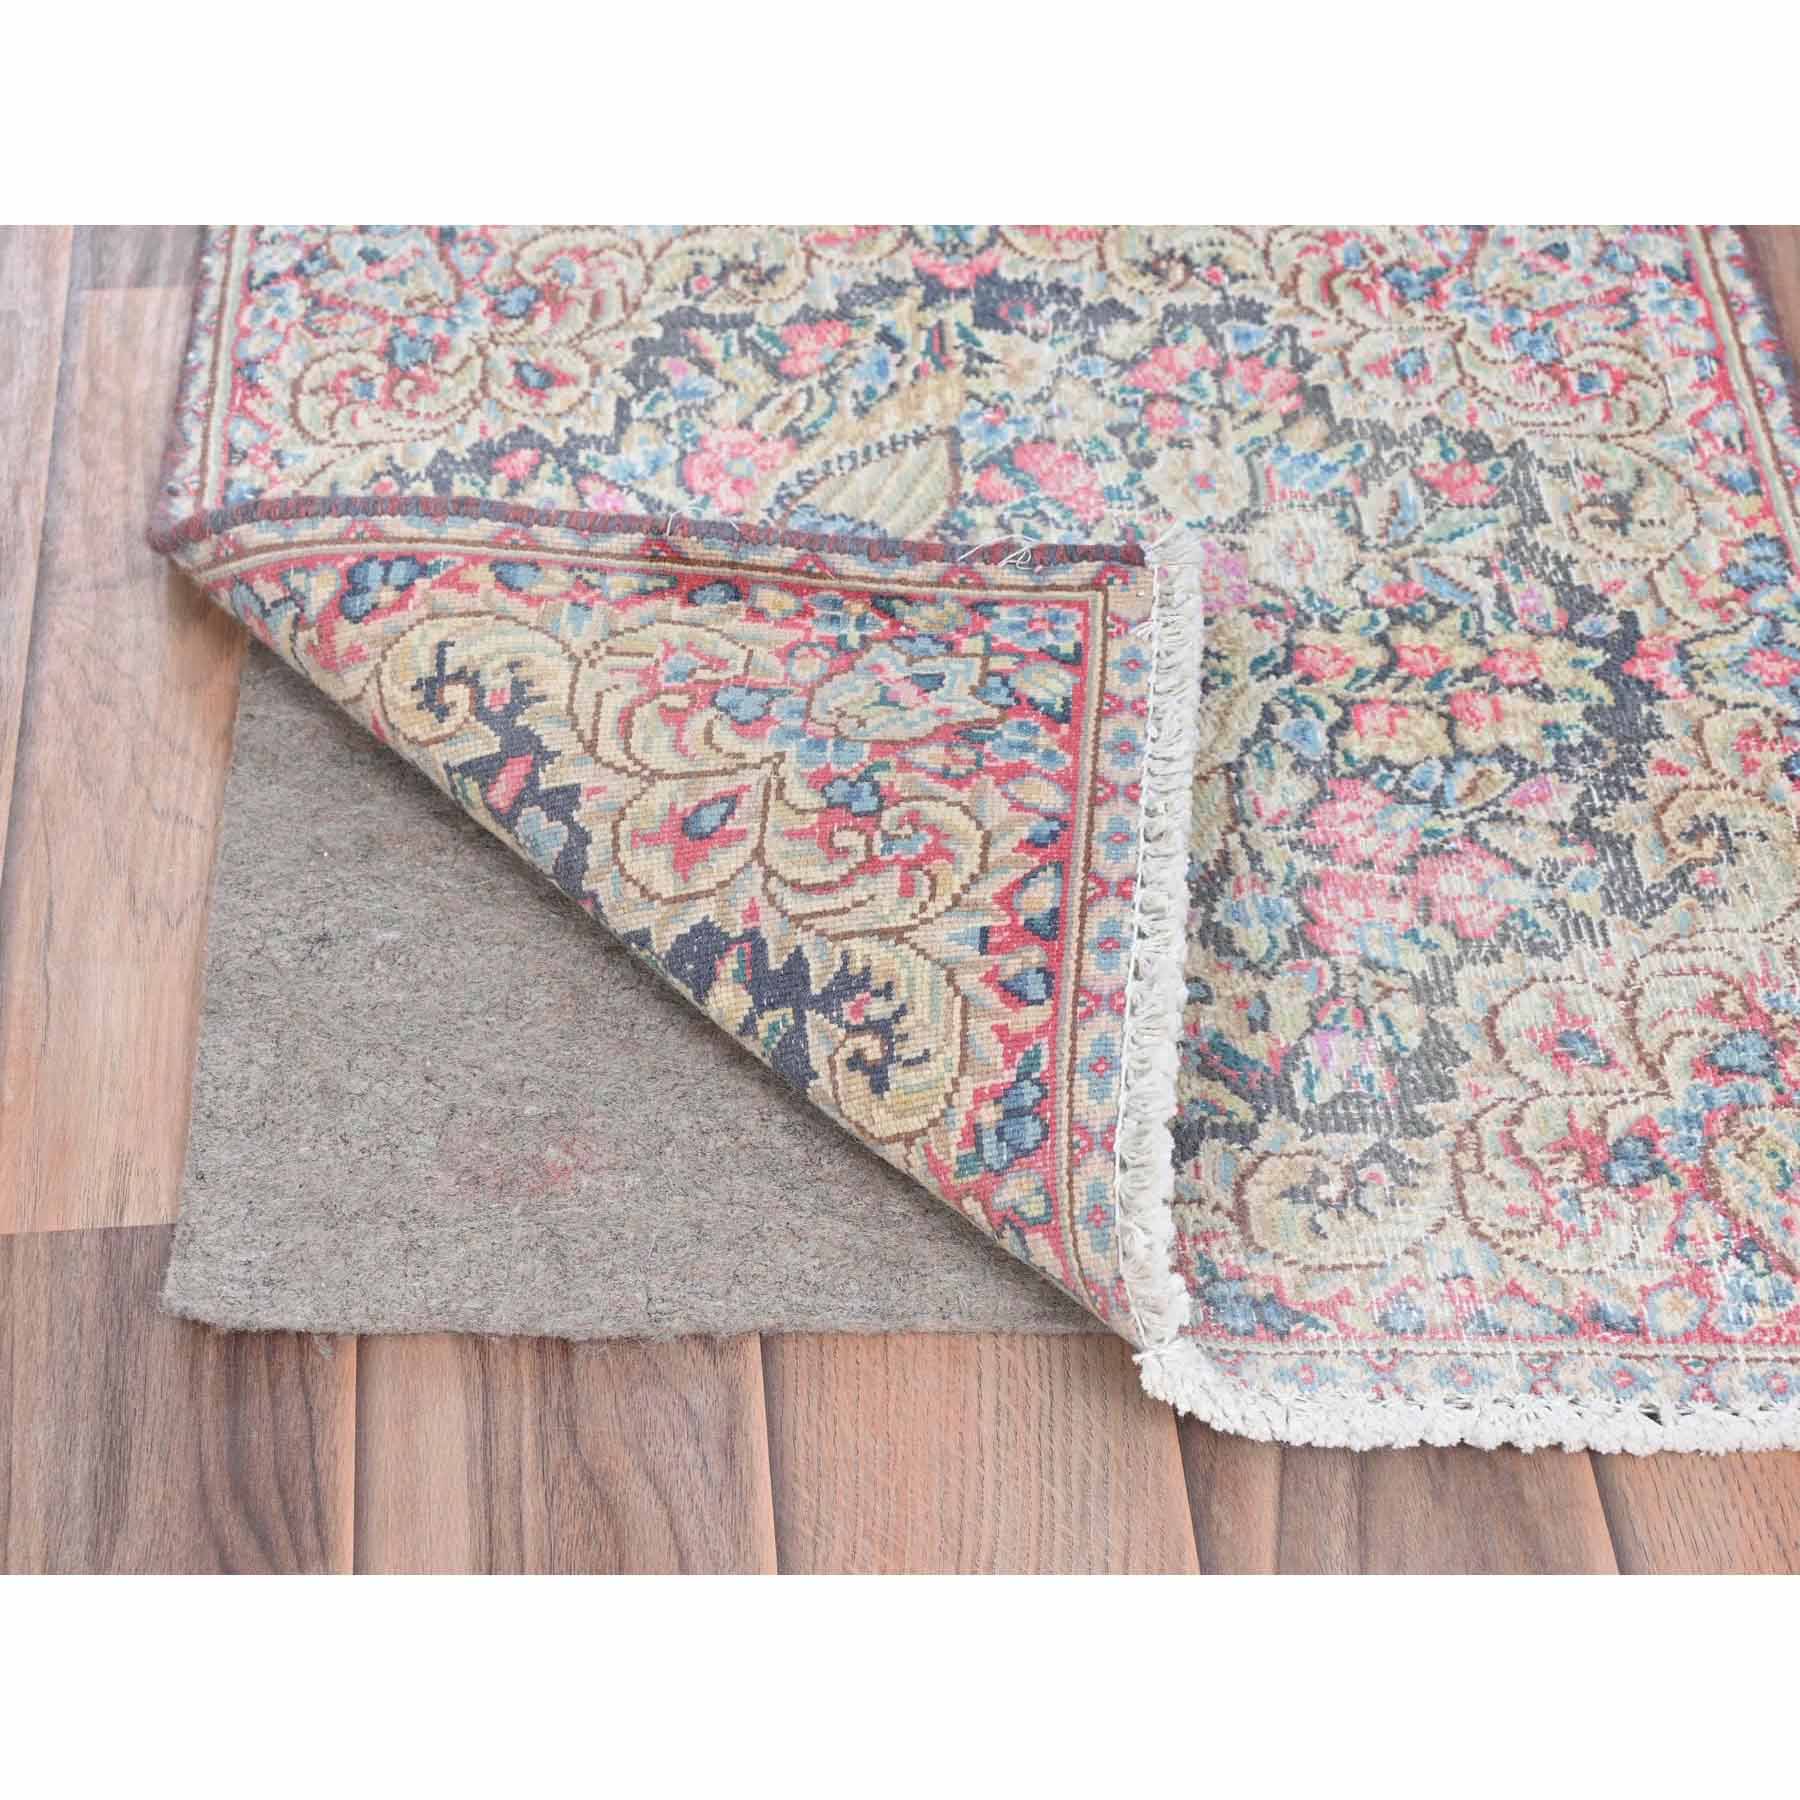 Overdyed-Vintage-Hand-Knotted-Rug-409745